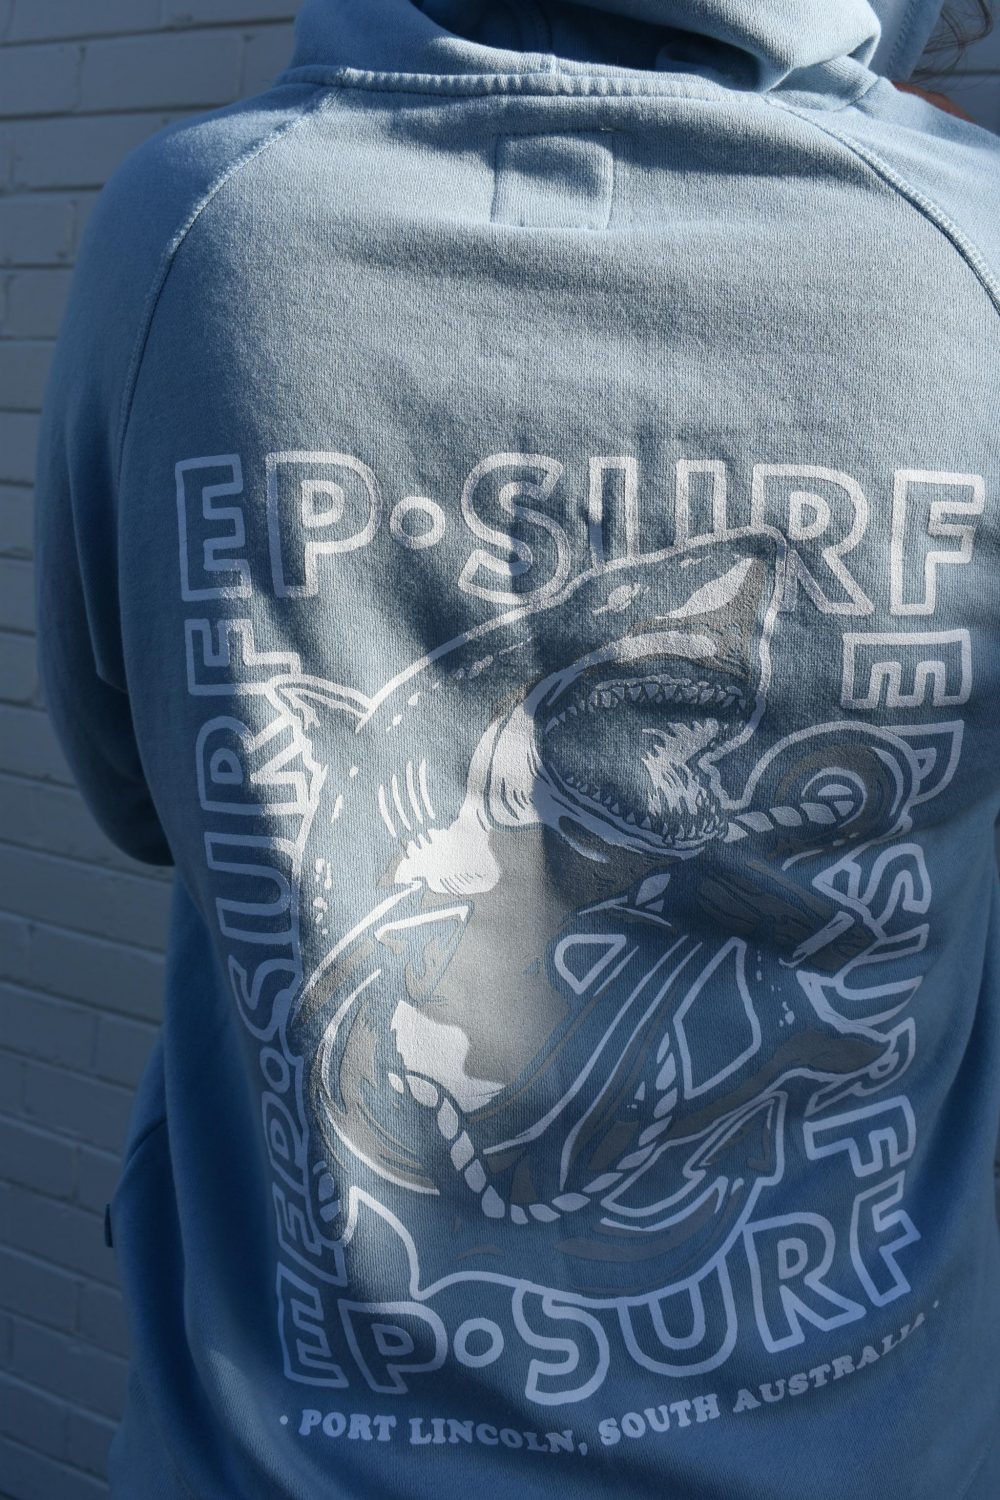 EPHWBSHARK Dusty Blue/white Ep Surf Ep Hoody W Biffy Shark Womens Jumpers & Crews Clothing Clothing